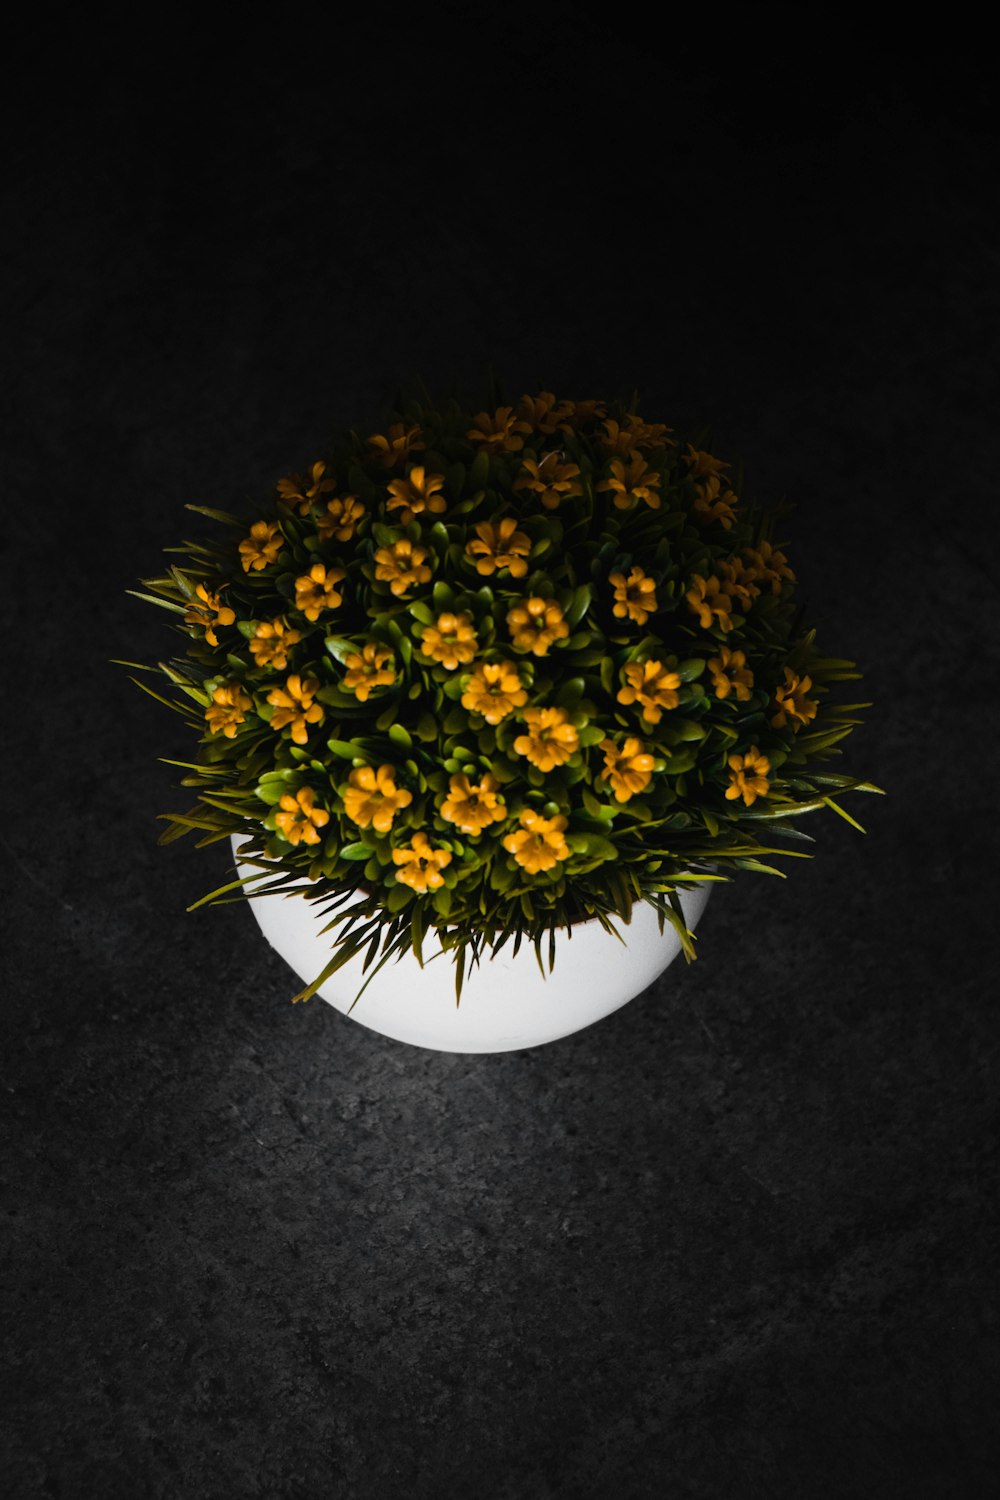 yellow and green flower on white round vase